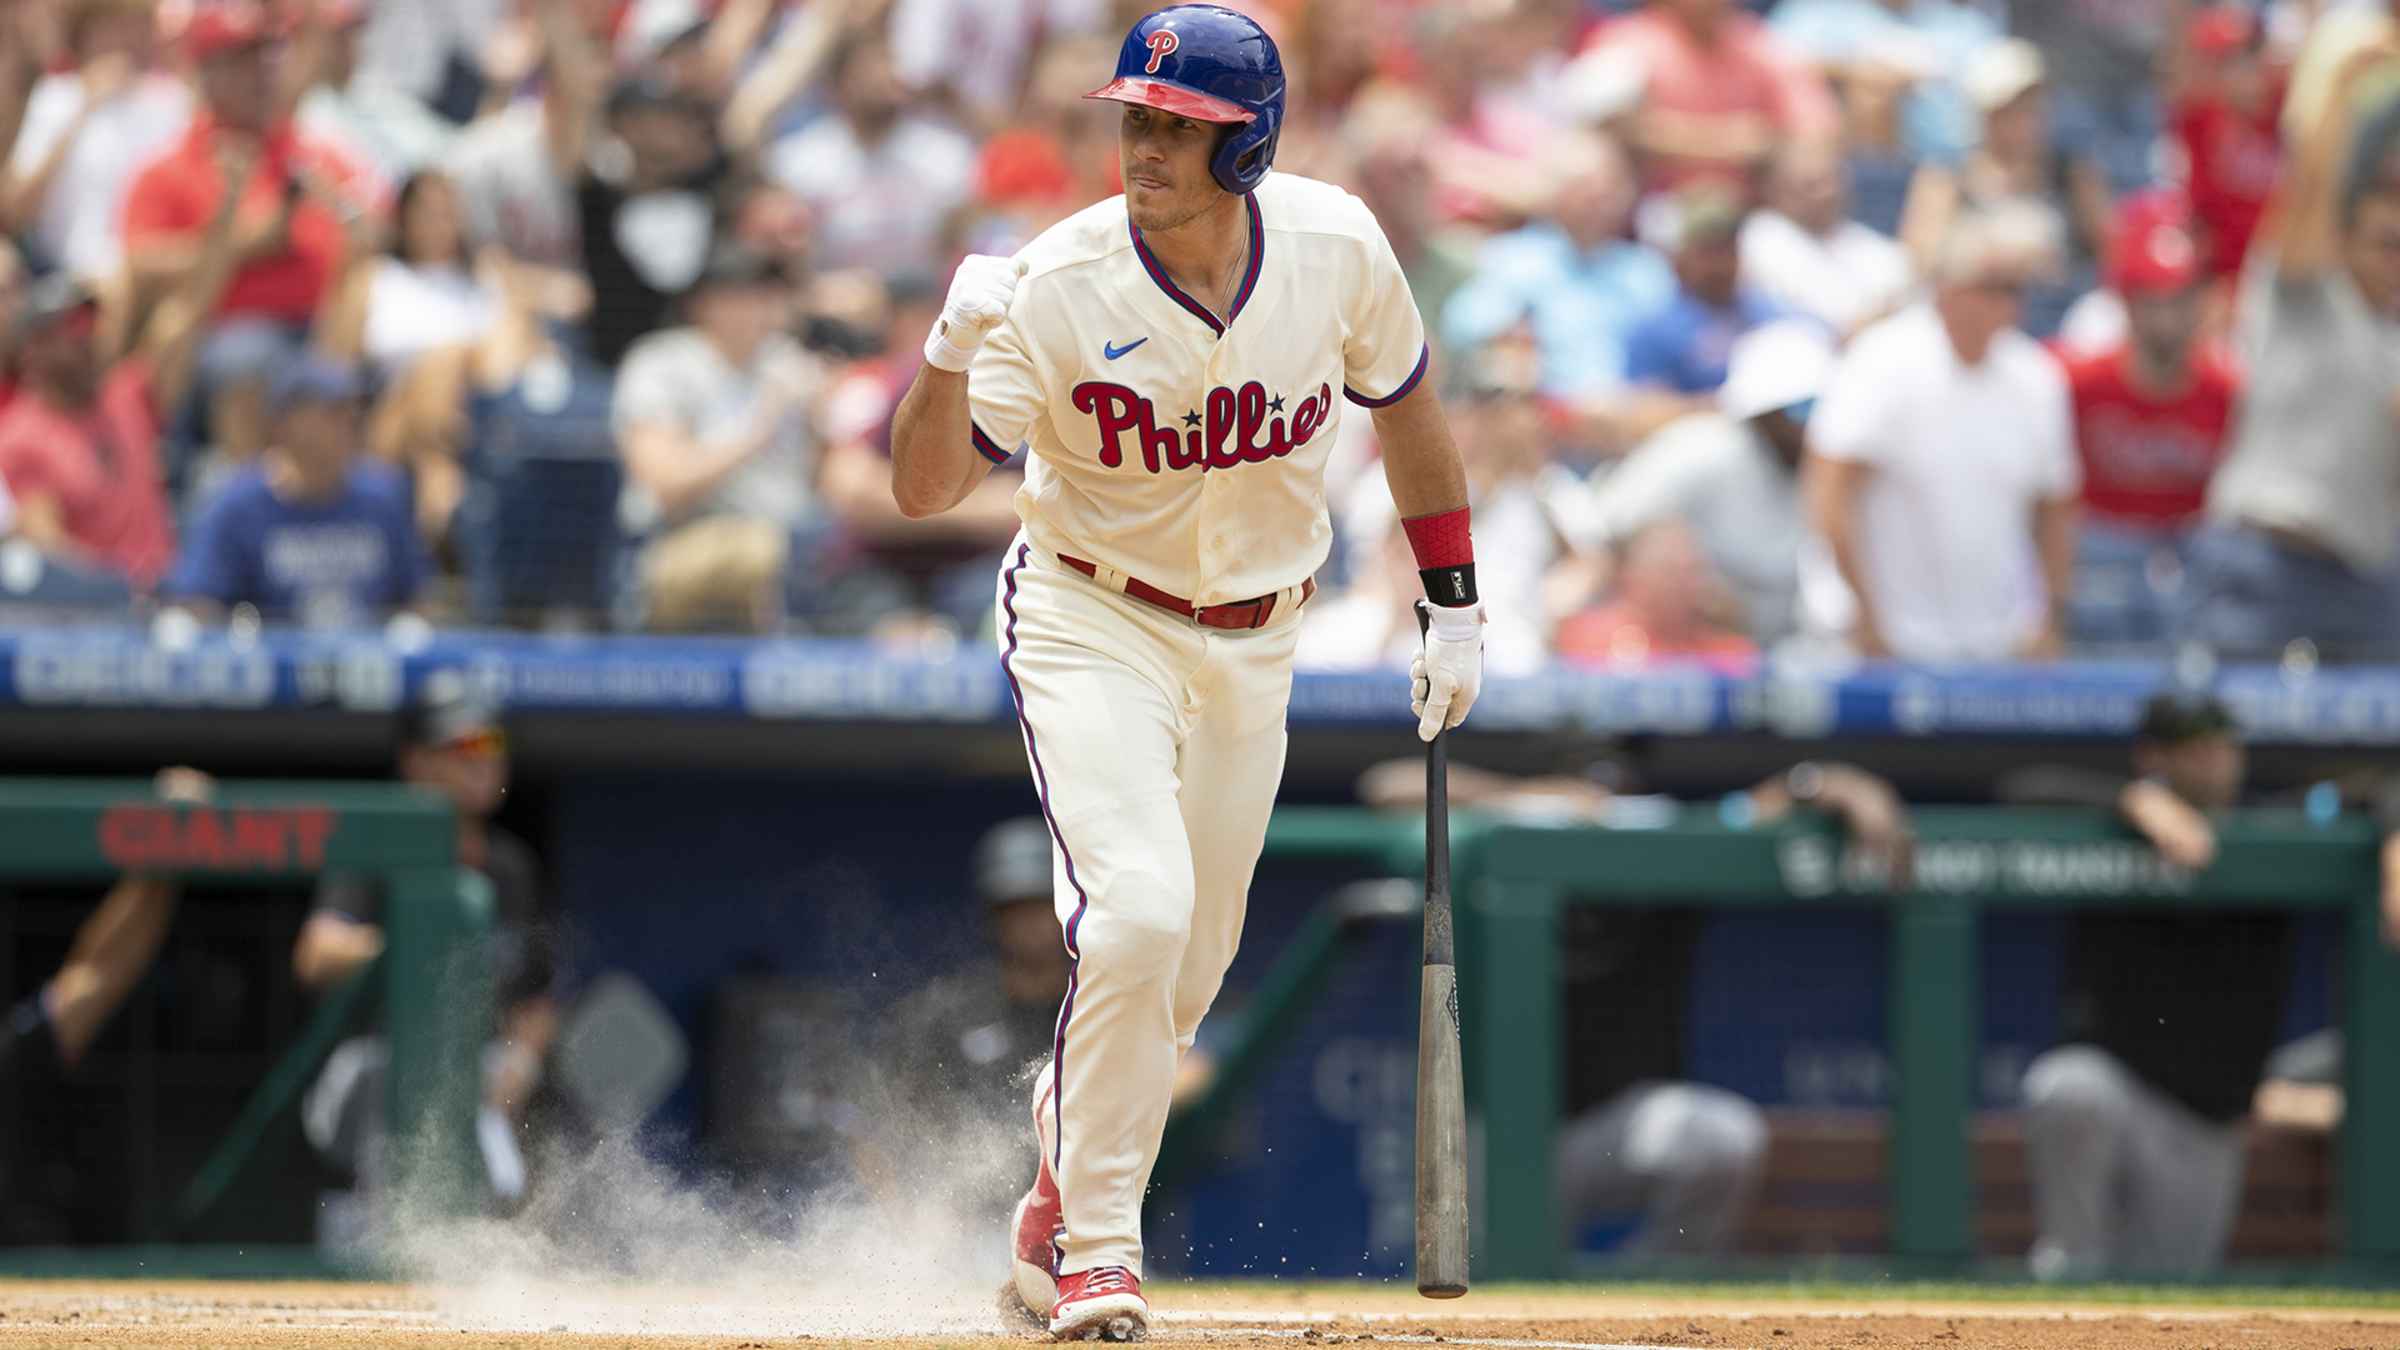 Phillies walk-off the Marlins